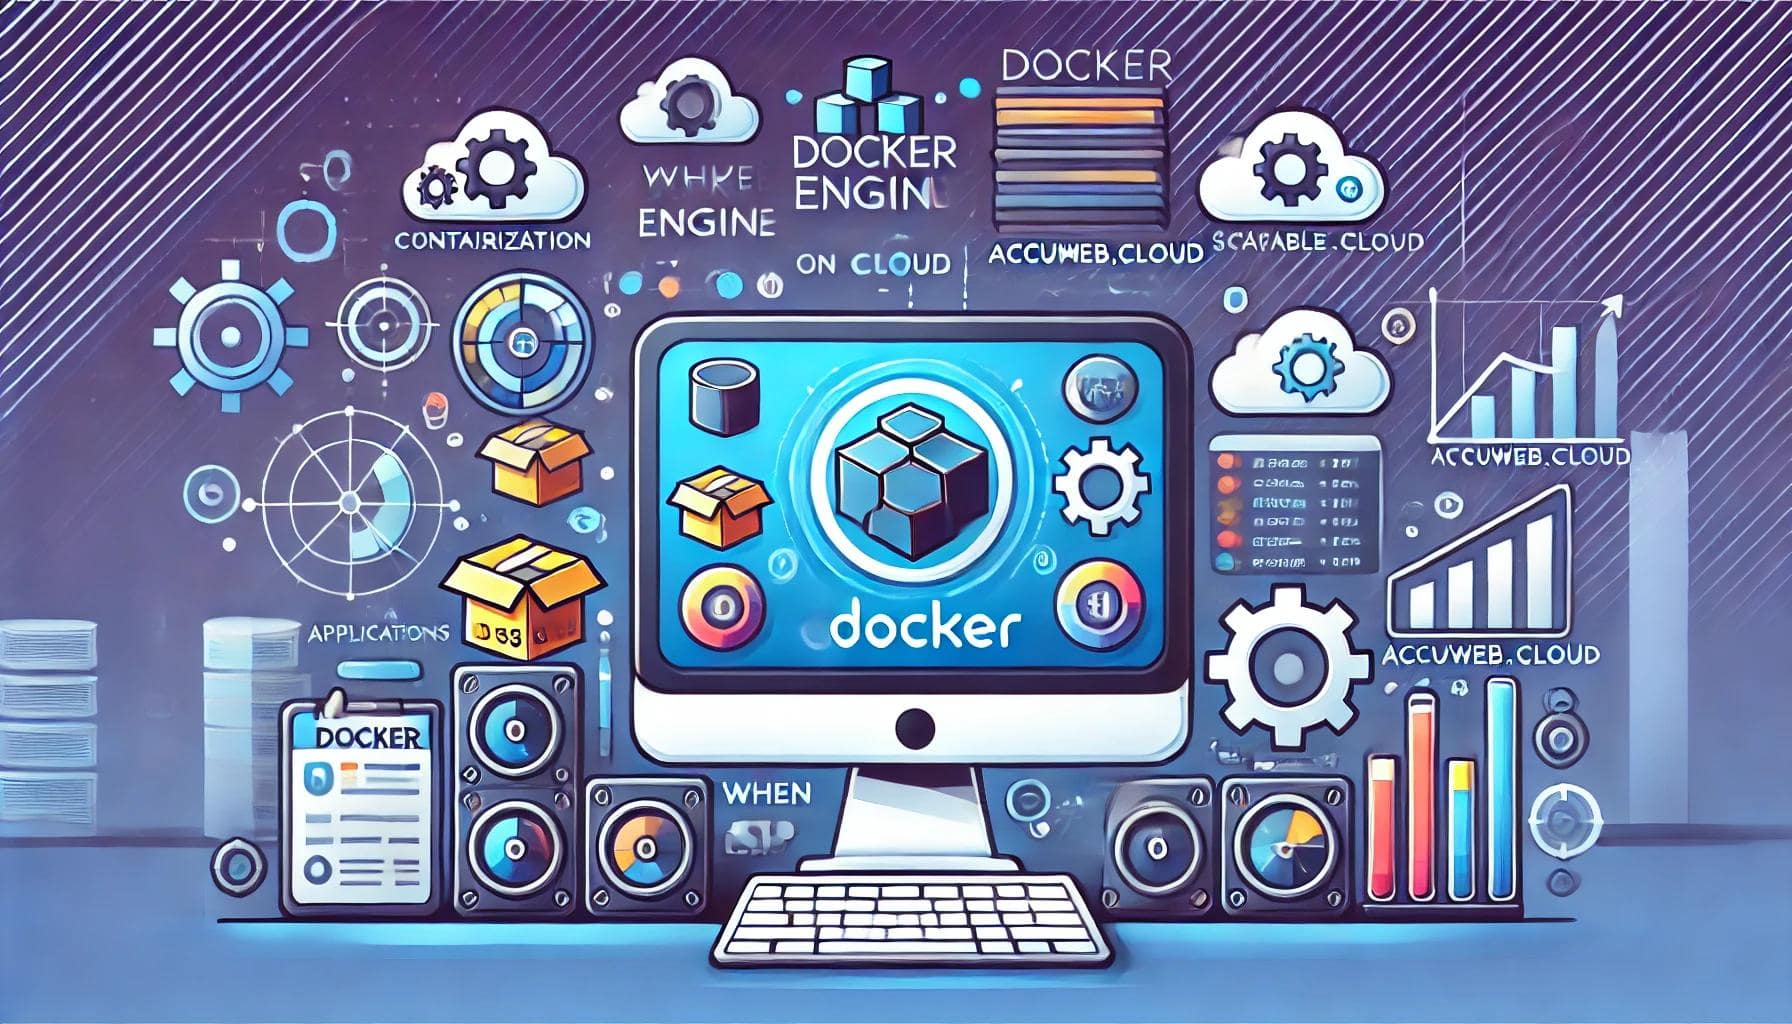 When to Use Docker Engine on AccuWeb.Cloud